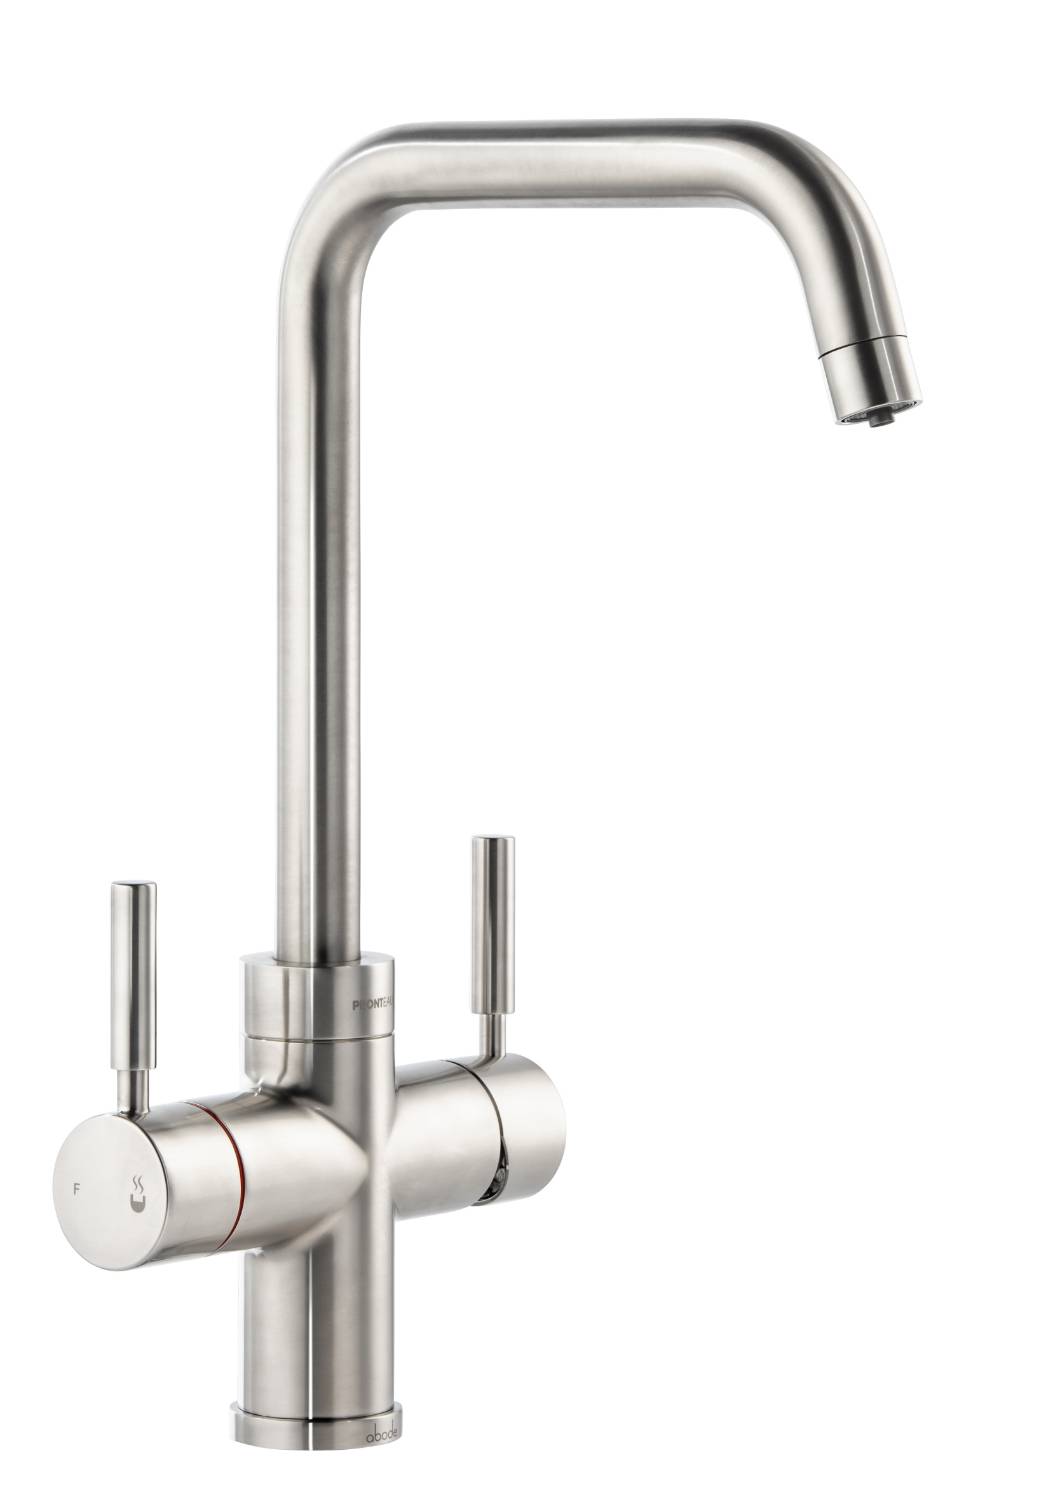 PRONTEAU™ Propure (Quad Spout) - 4 in 1 Steaming Hot Water Tap - Boiling Hot and Filtered Four Way Tap